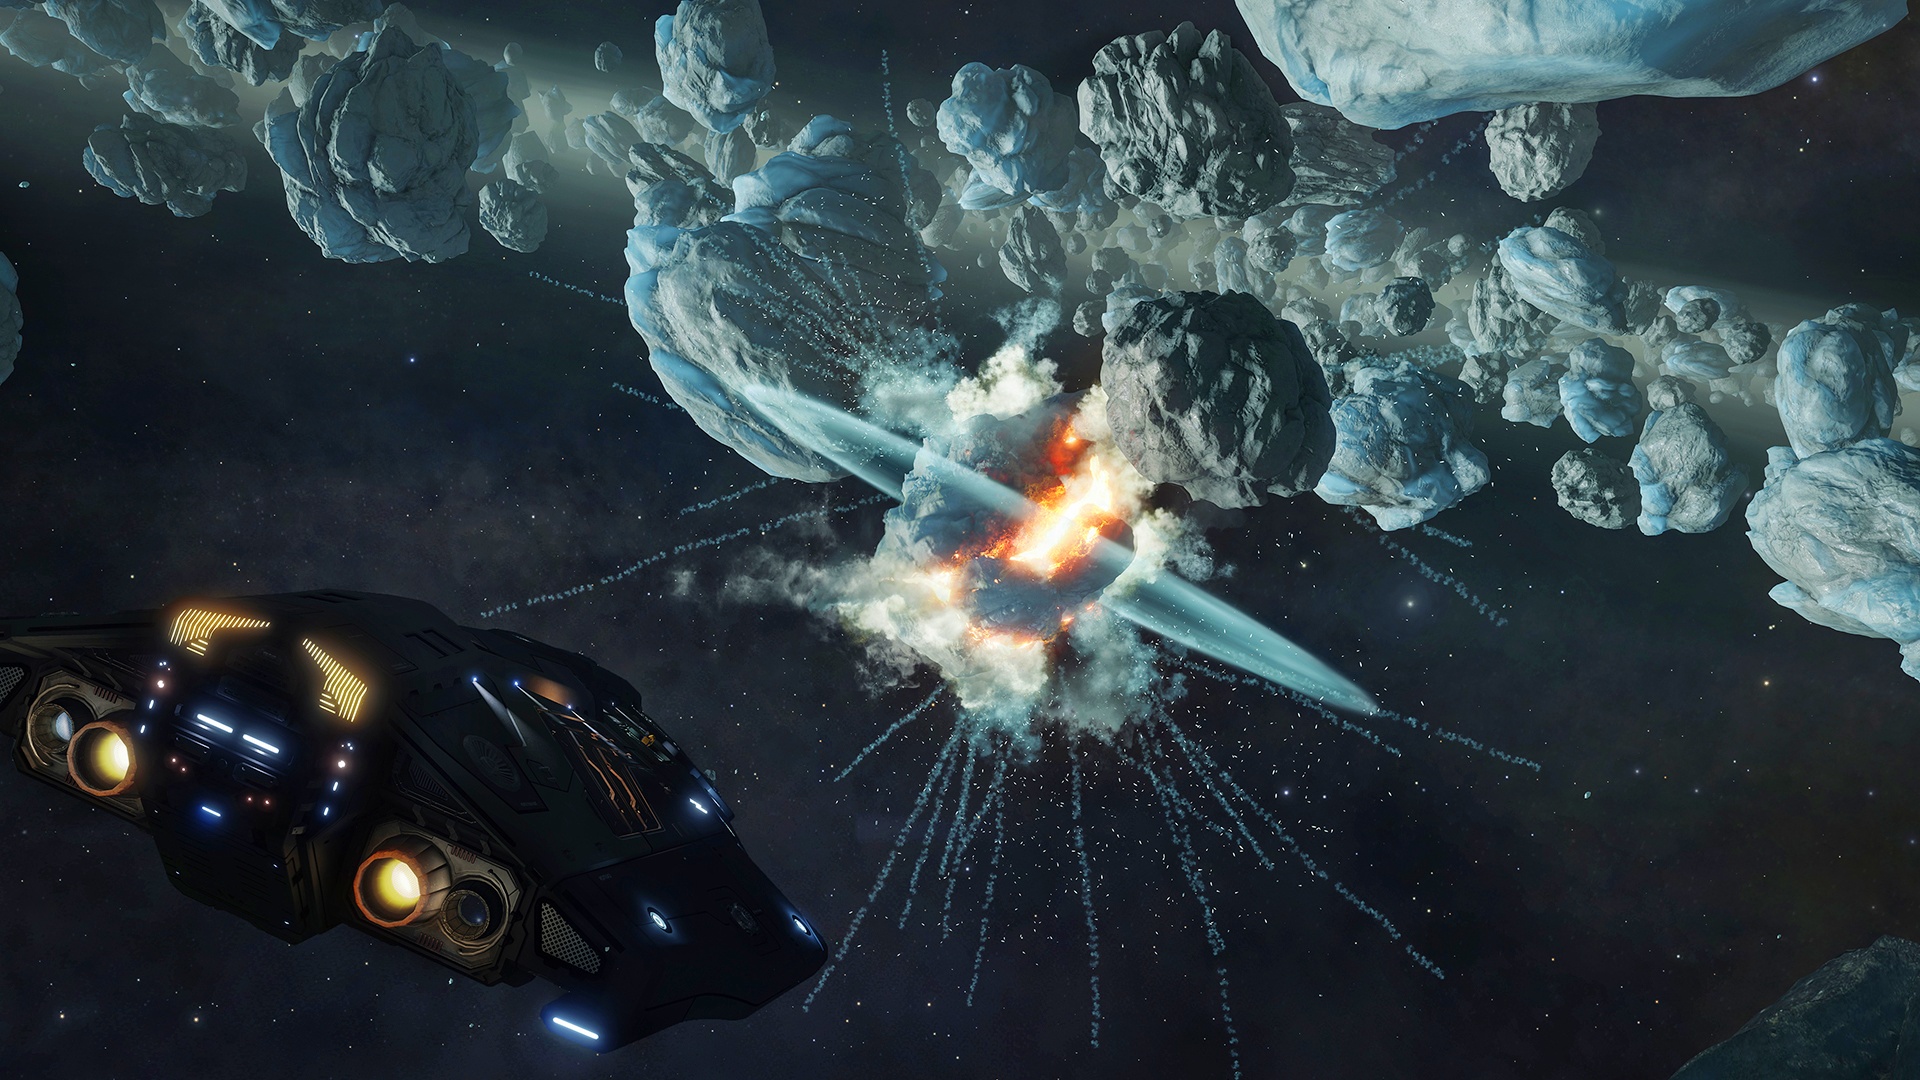 Game review: Elite Dangerous on PS4 is the space epic of your dreams